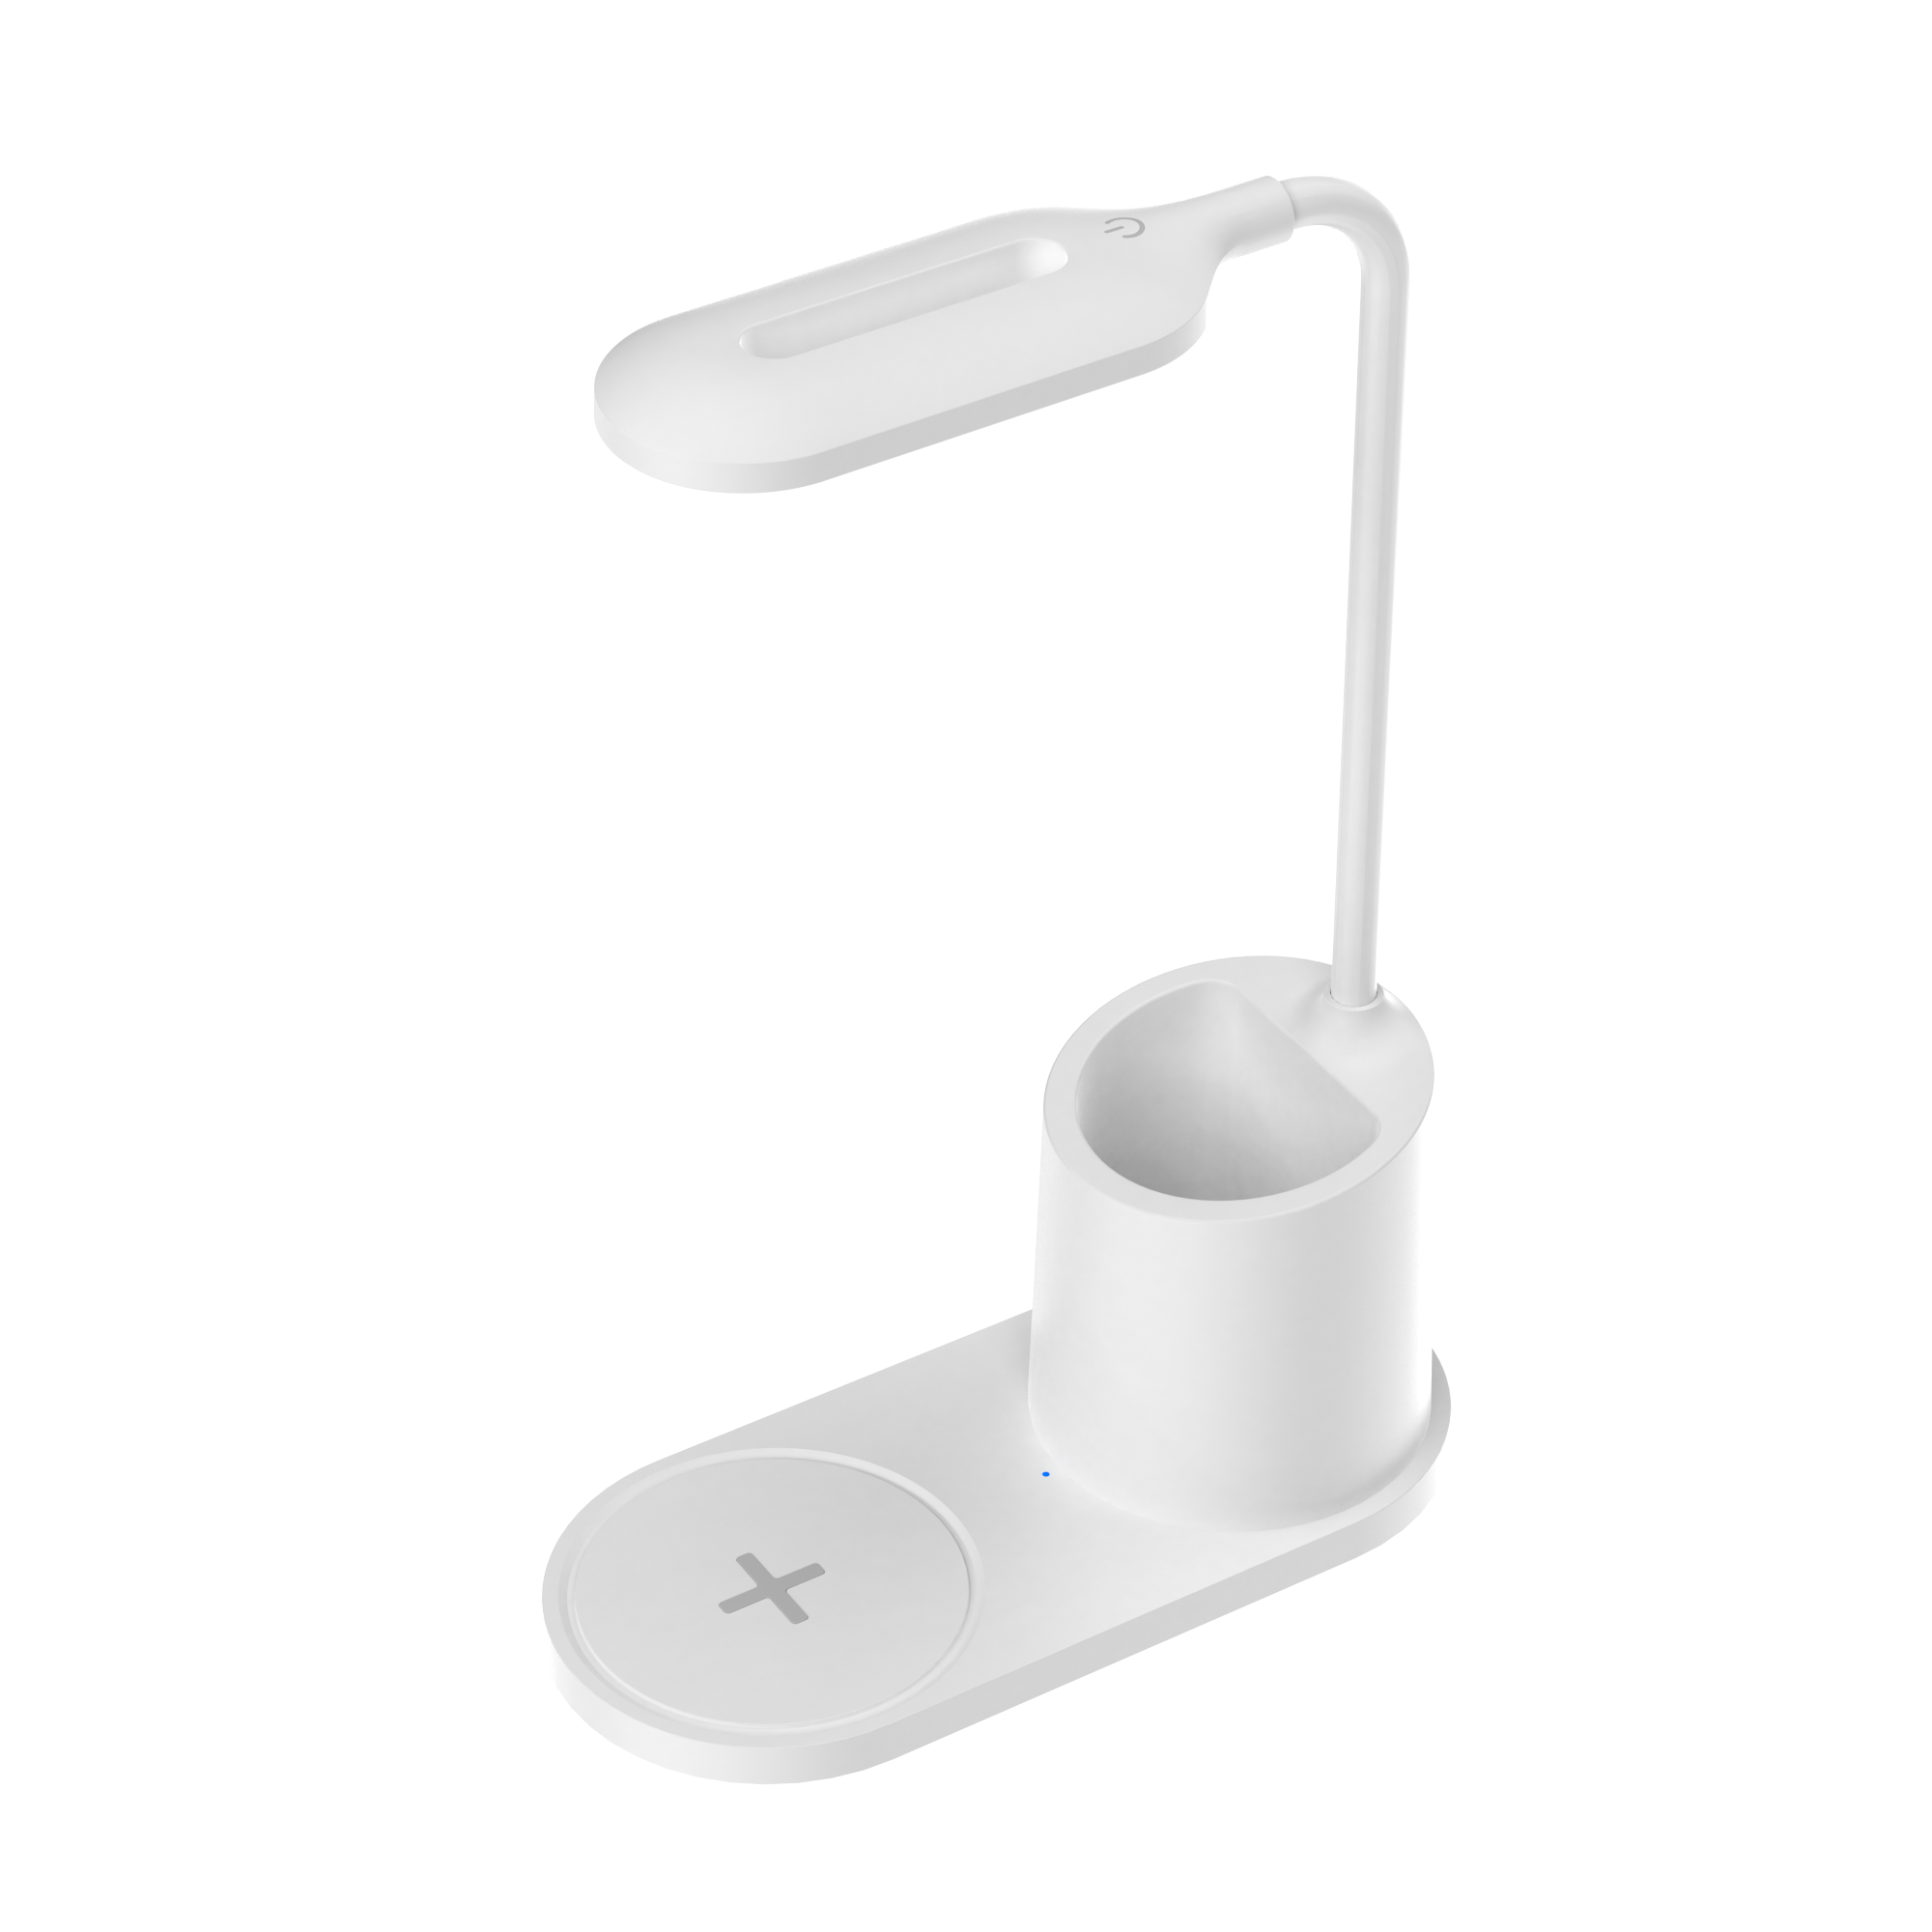 Hot Aelling On Amazon Led Table Lamps With Holder Wireless Charger Night Light 3 in 1 Office Lamp Touch Switch For Study